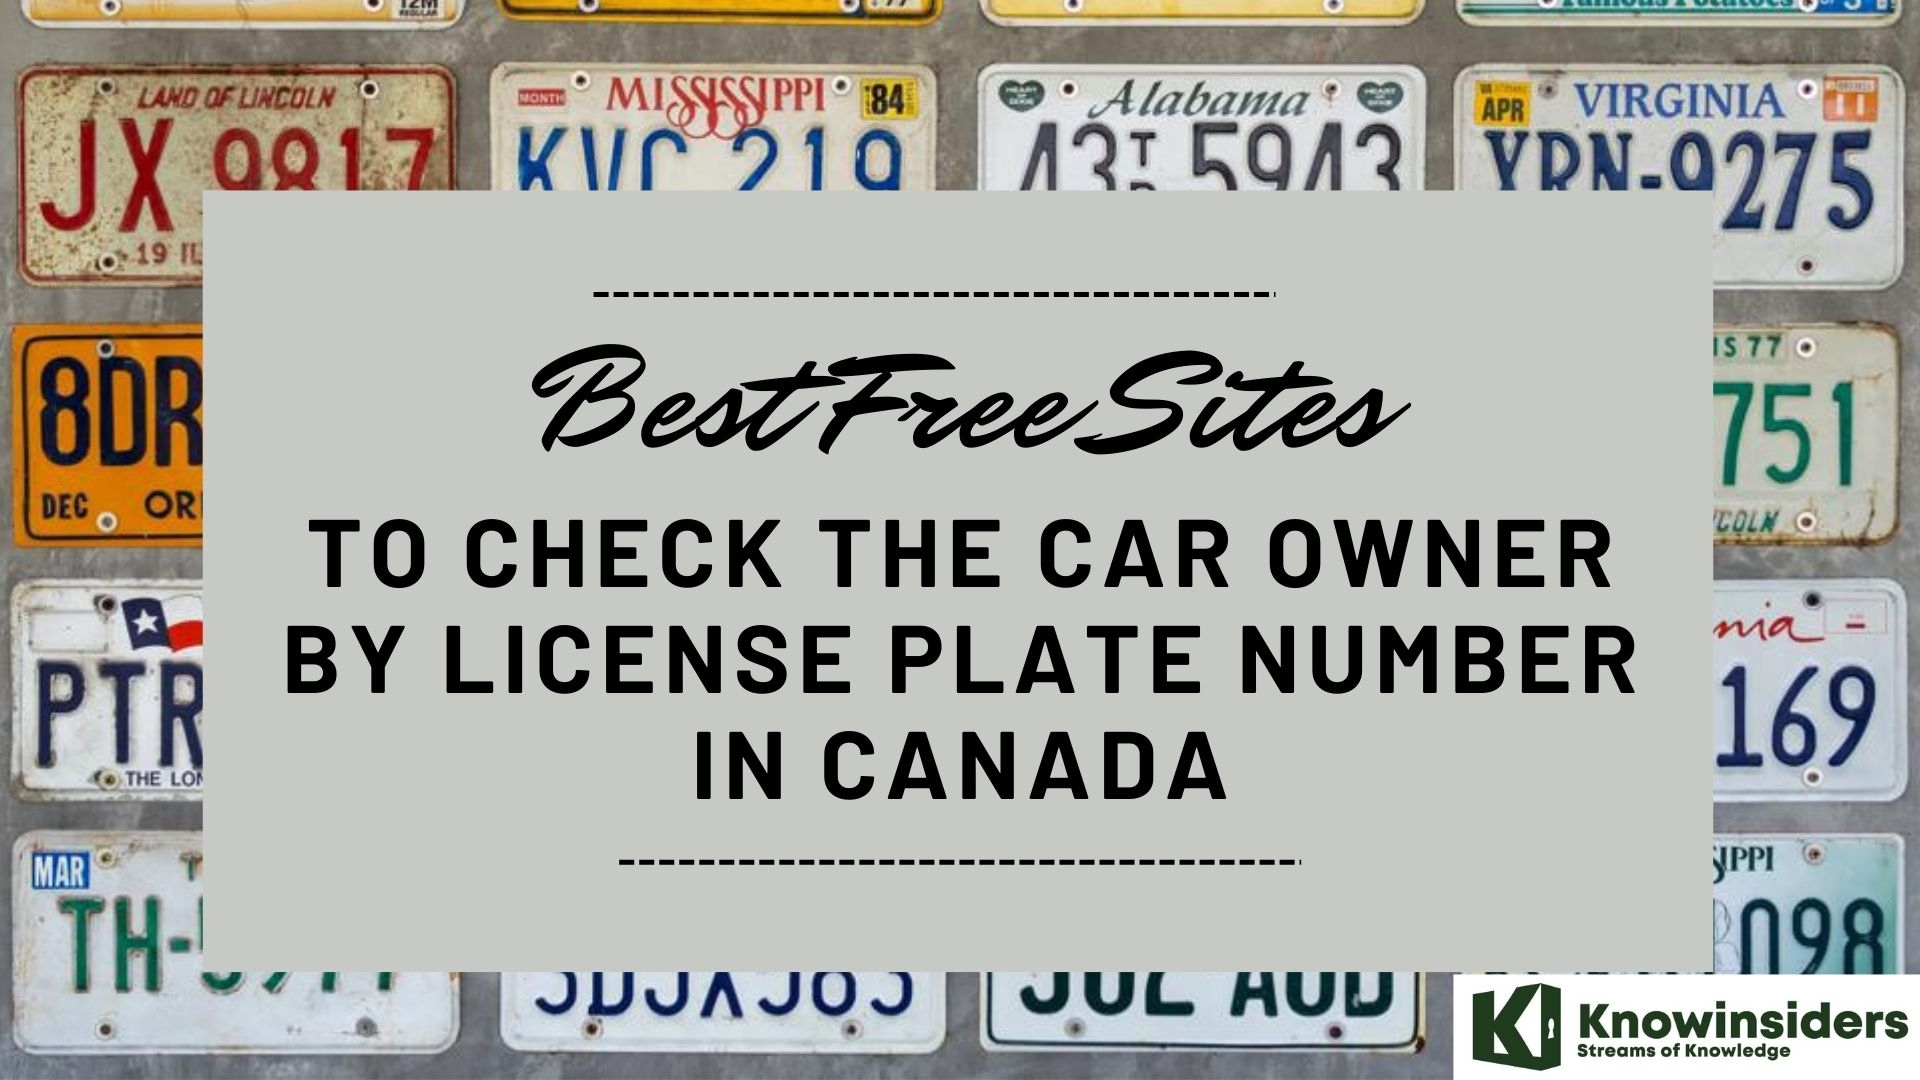 How to Check The Car Owner In Canada by License Plate Number